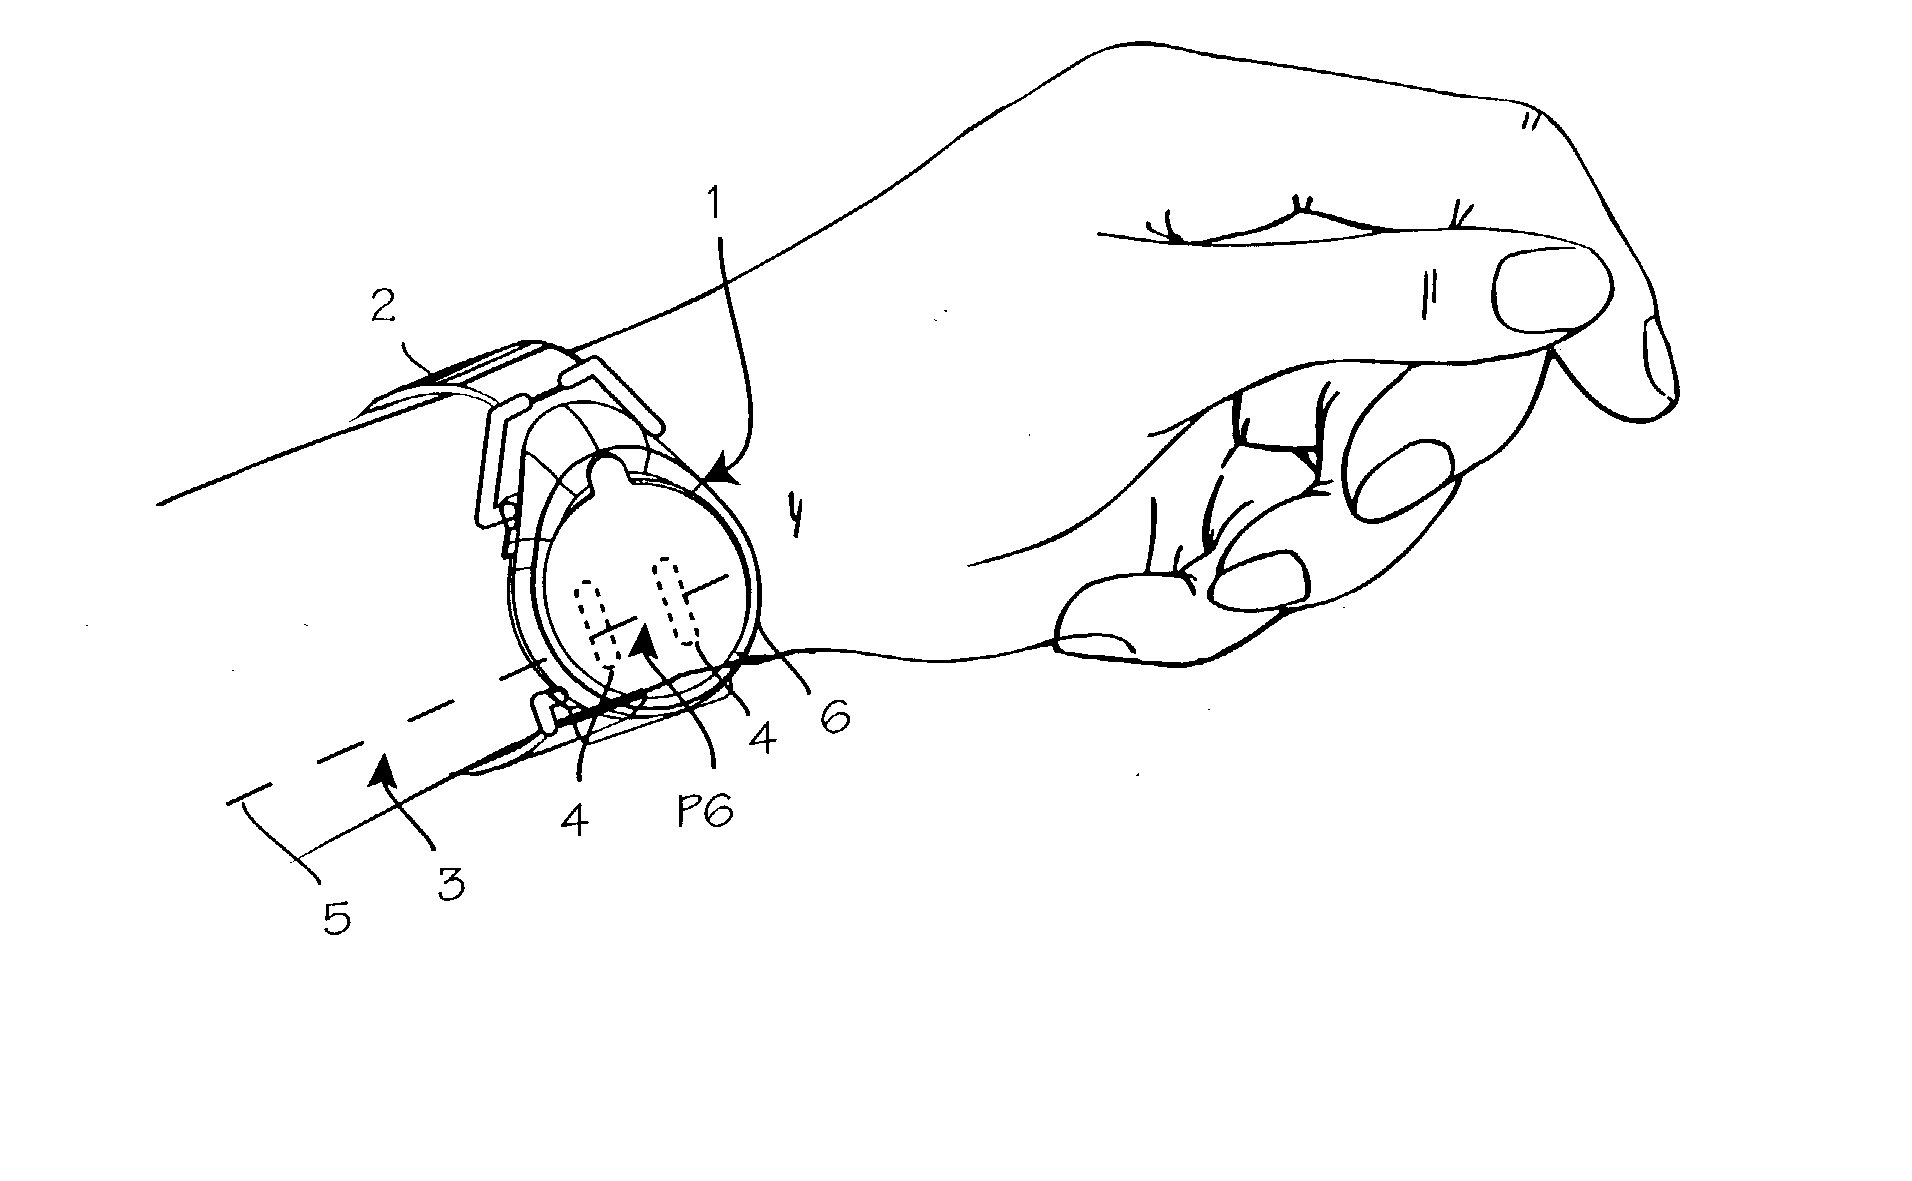 Electro-acupuncture device with stimulation electrode assembly